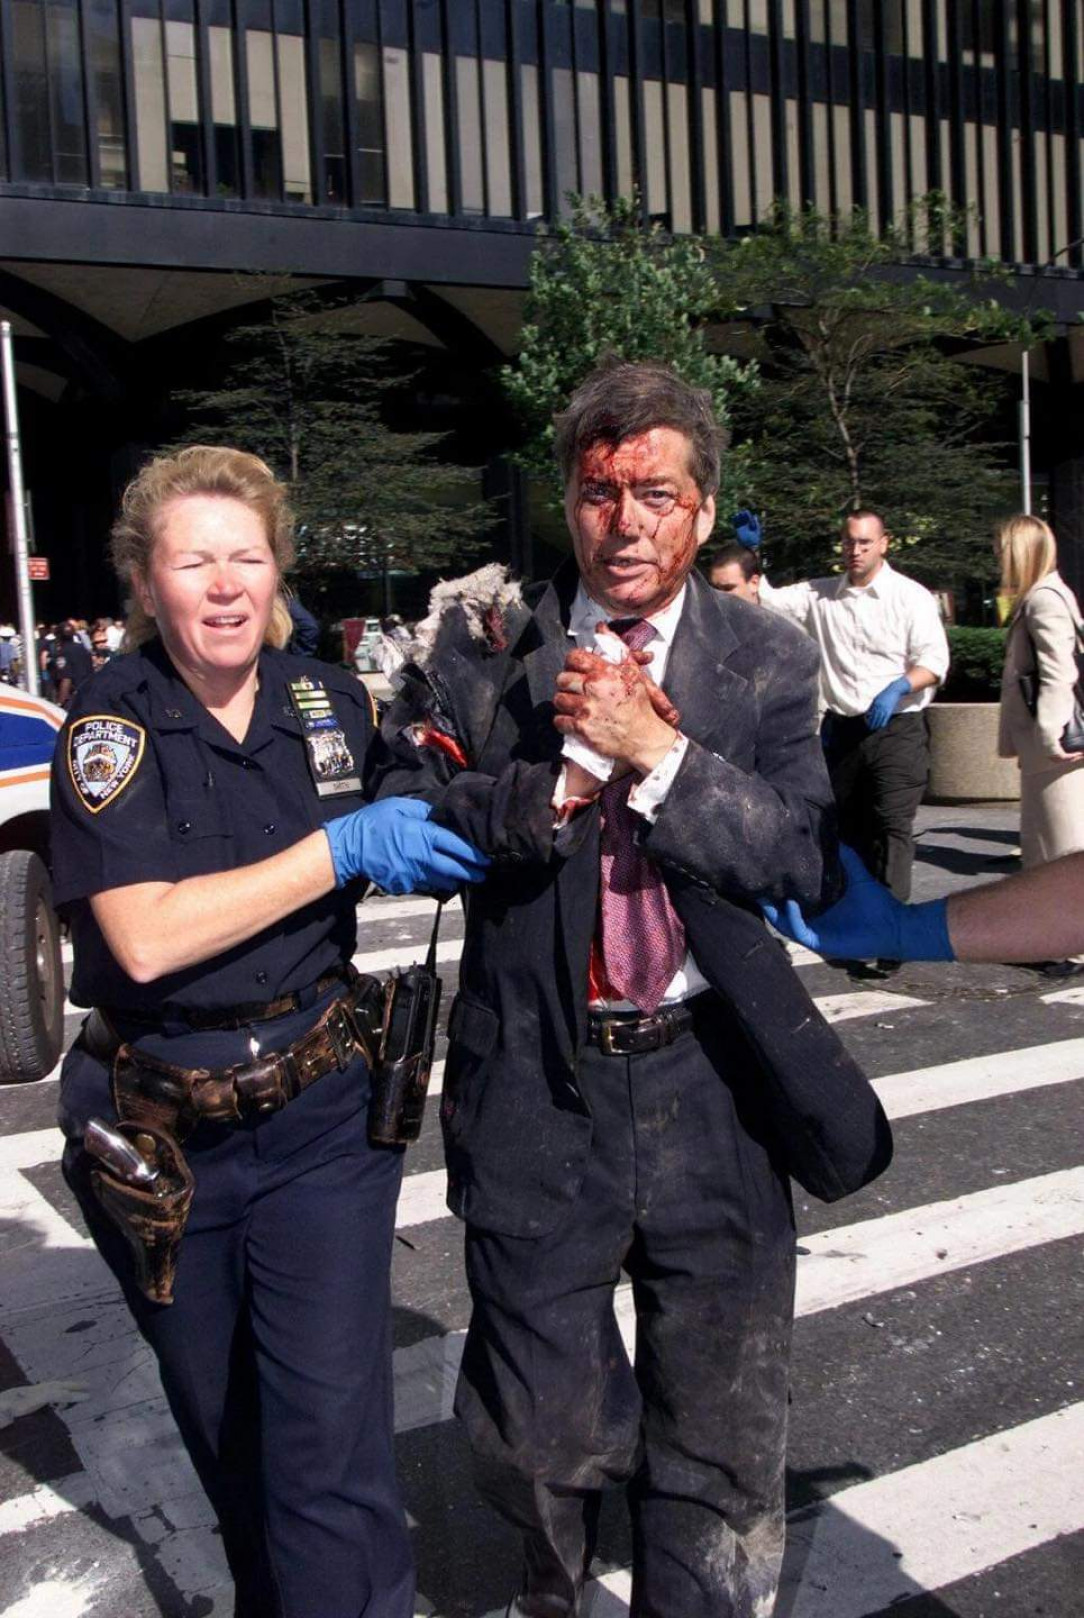 Only female NYPD officer to die during 9/11 (story in comments)